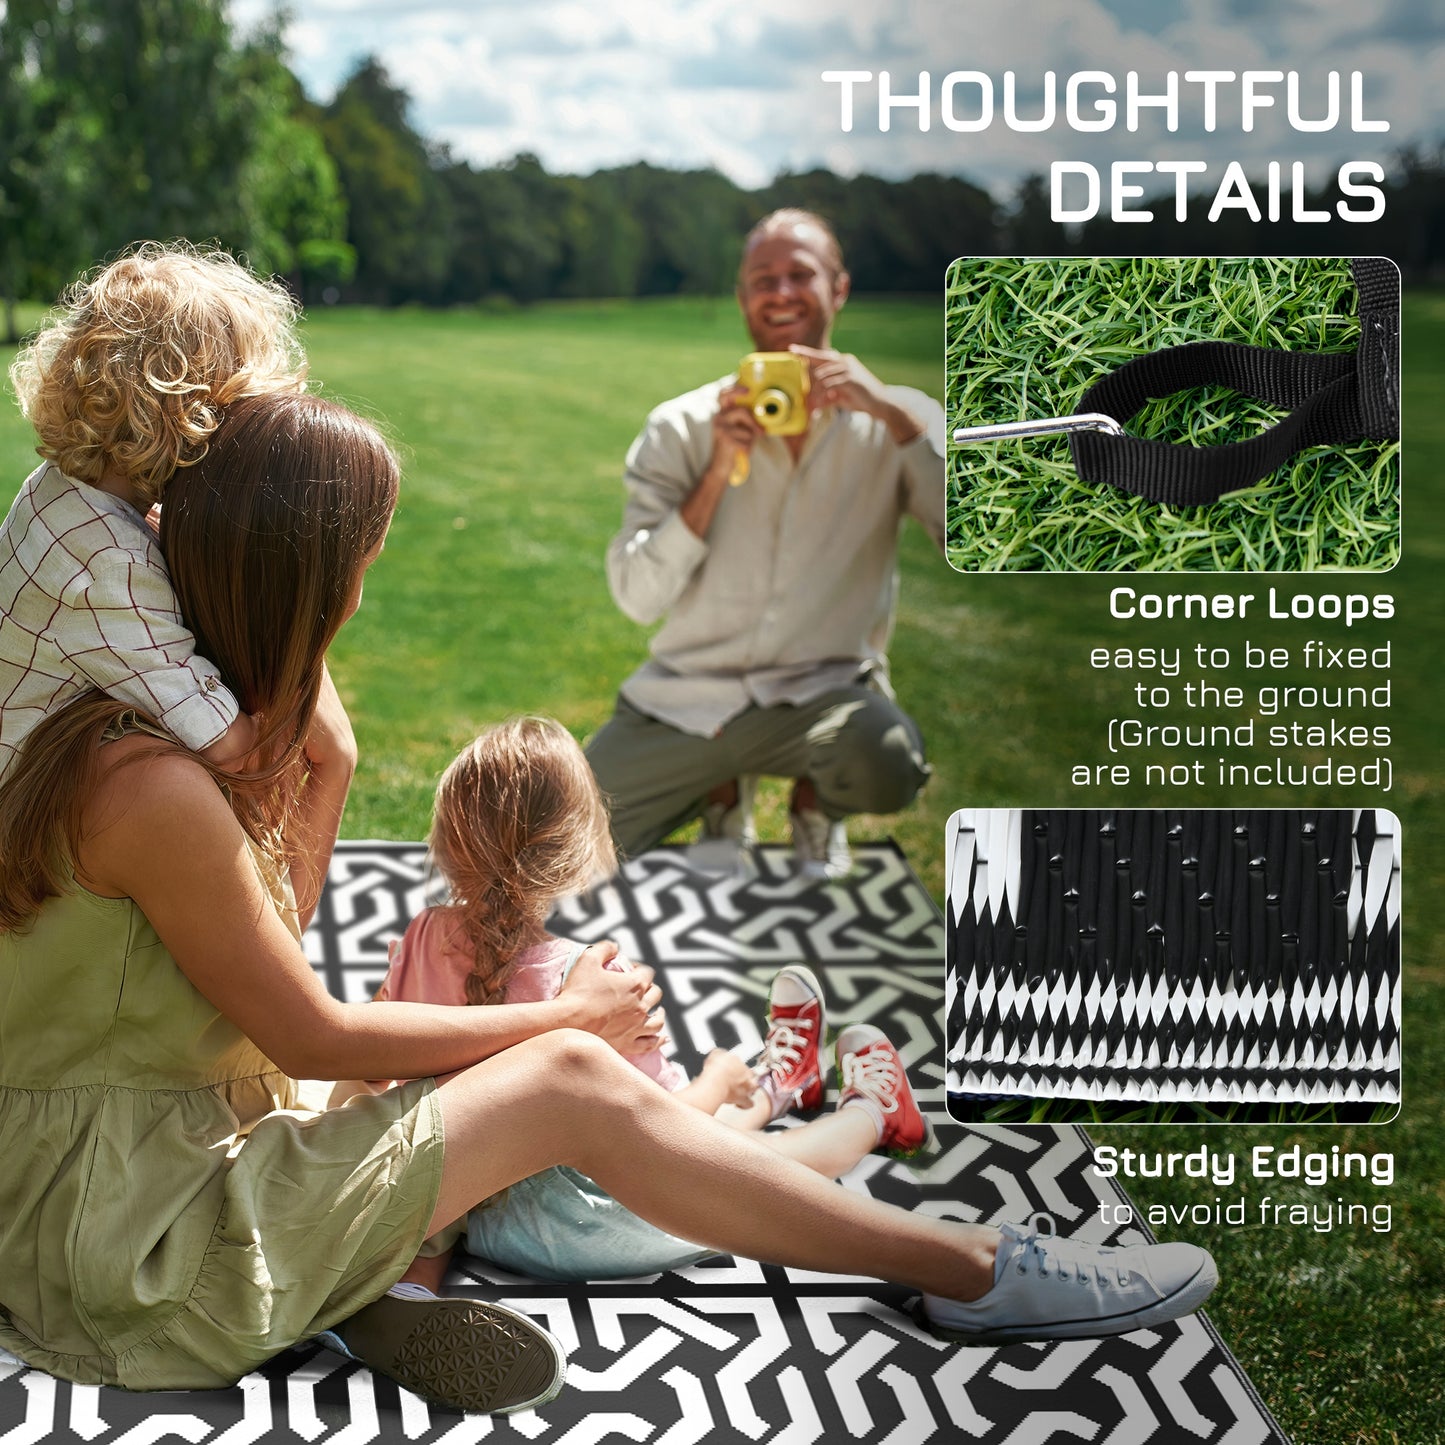 Reversible Outdoor Rug Waterproof Plastic Straw RV Rug with Carry Bag, 9' x 18', Black and White Chain at Gallery Canada